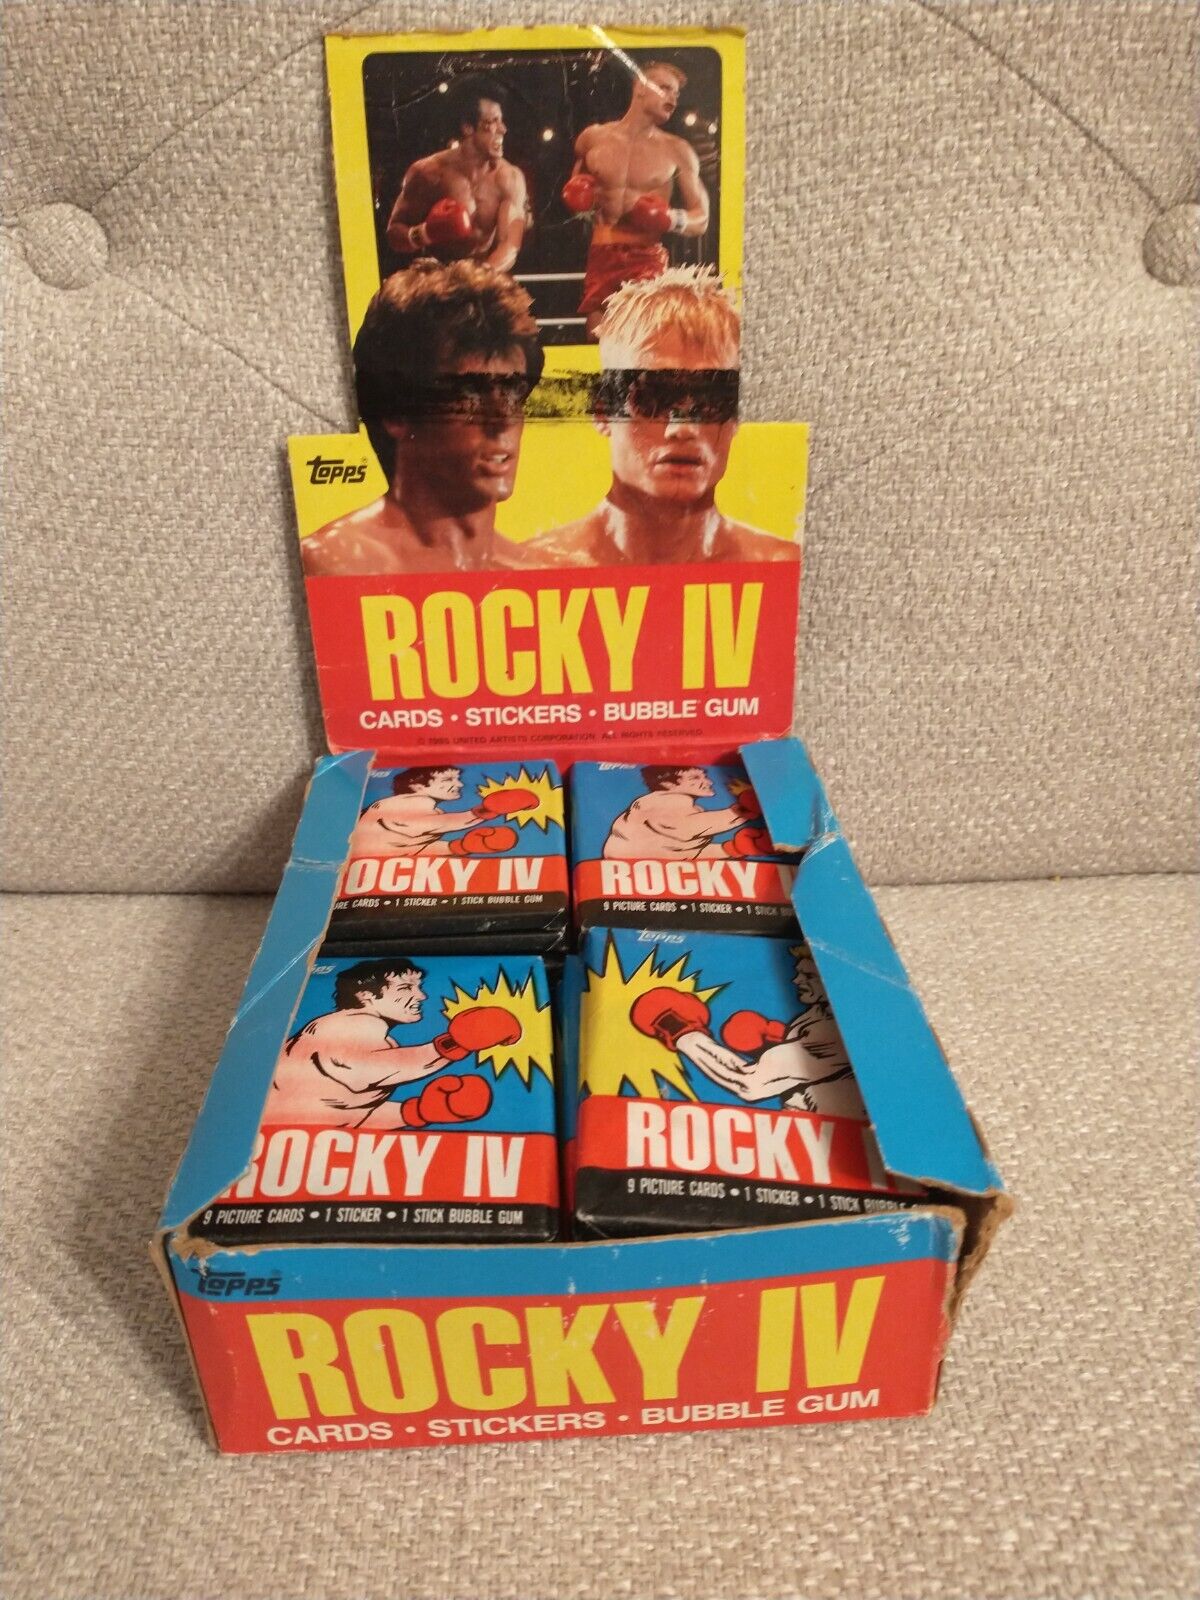 1985 Topps ROCKY IV Movie Trading Cards Unopened Wax Pack Vintage